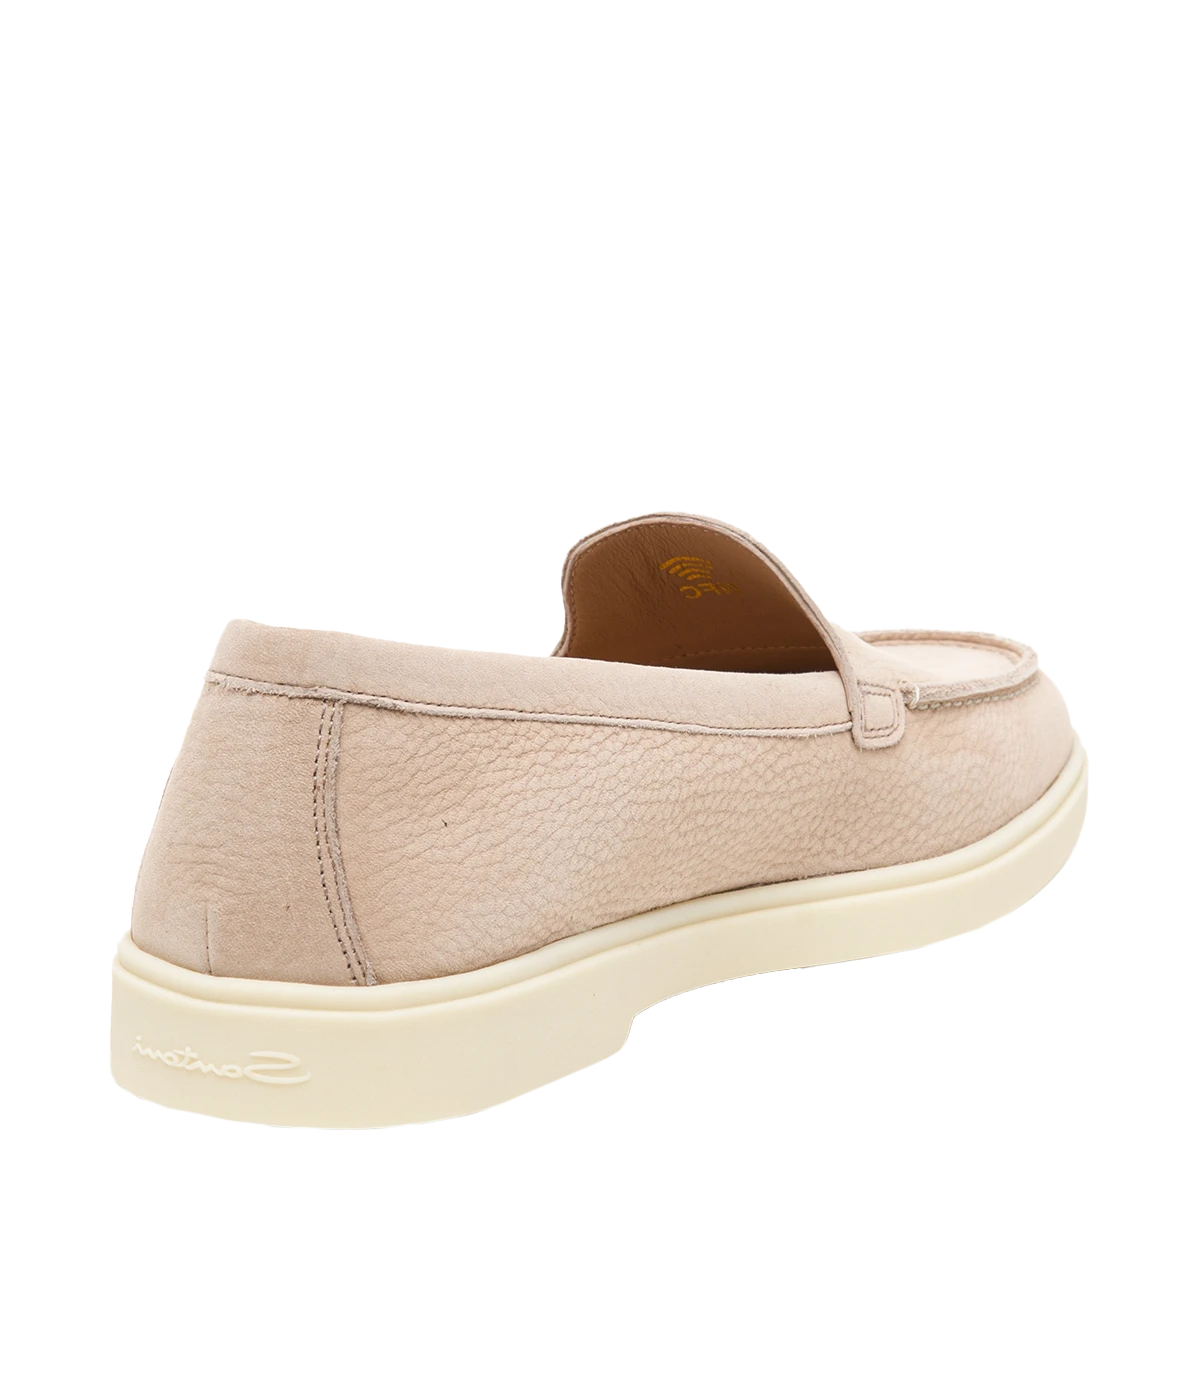 Yalta Loafer in Shell